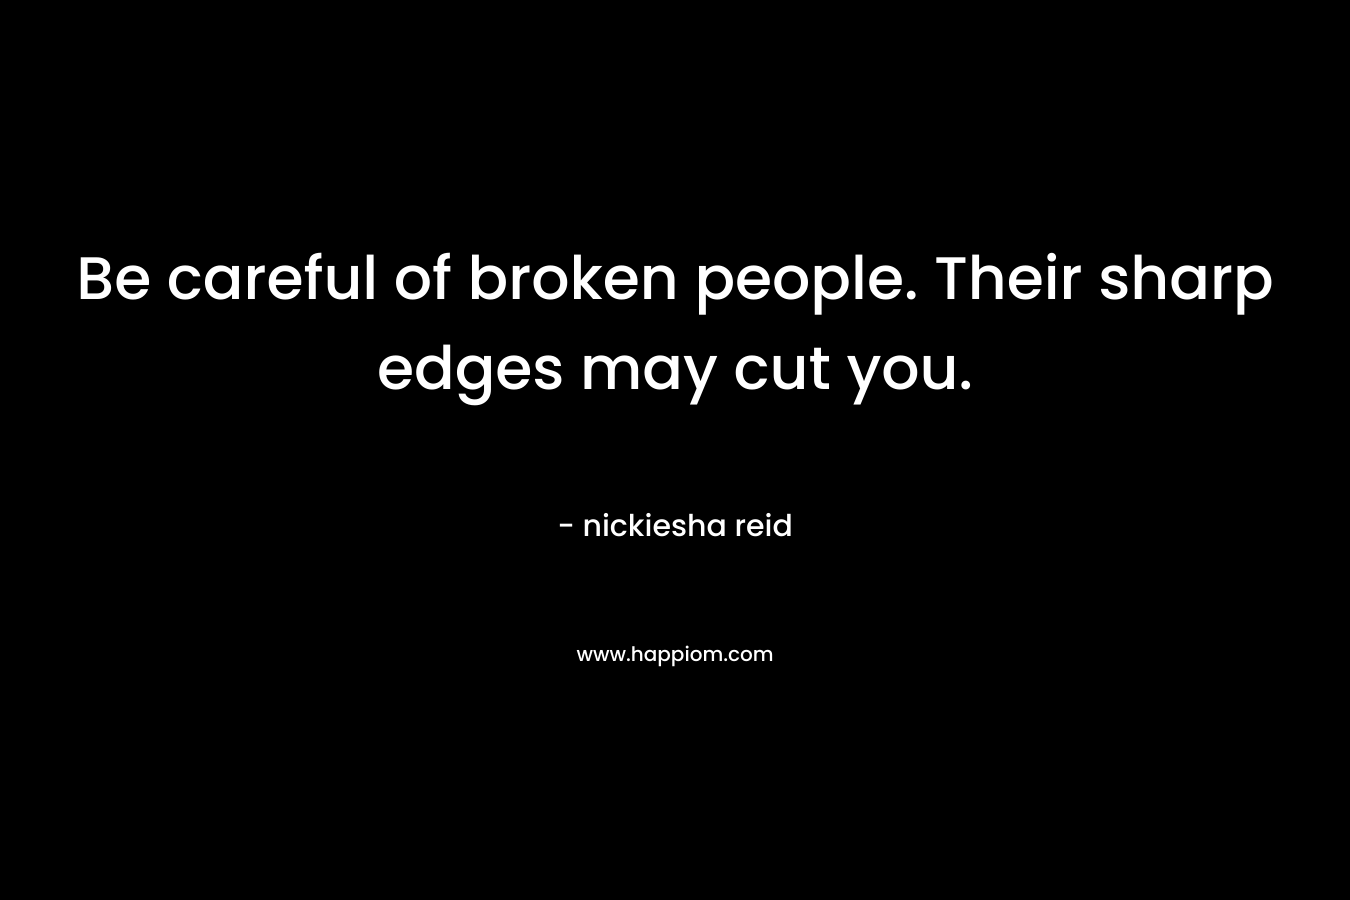 Be careful of broken people. Their sharp edges may cut you.